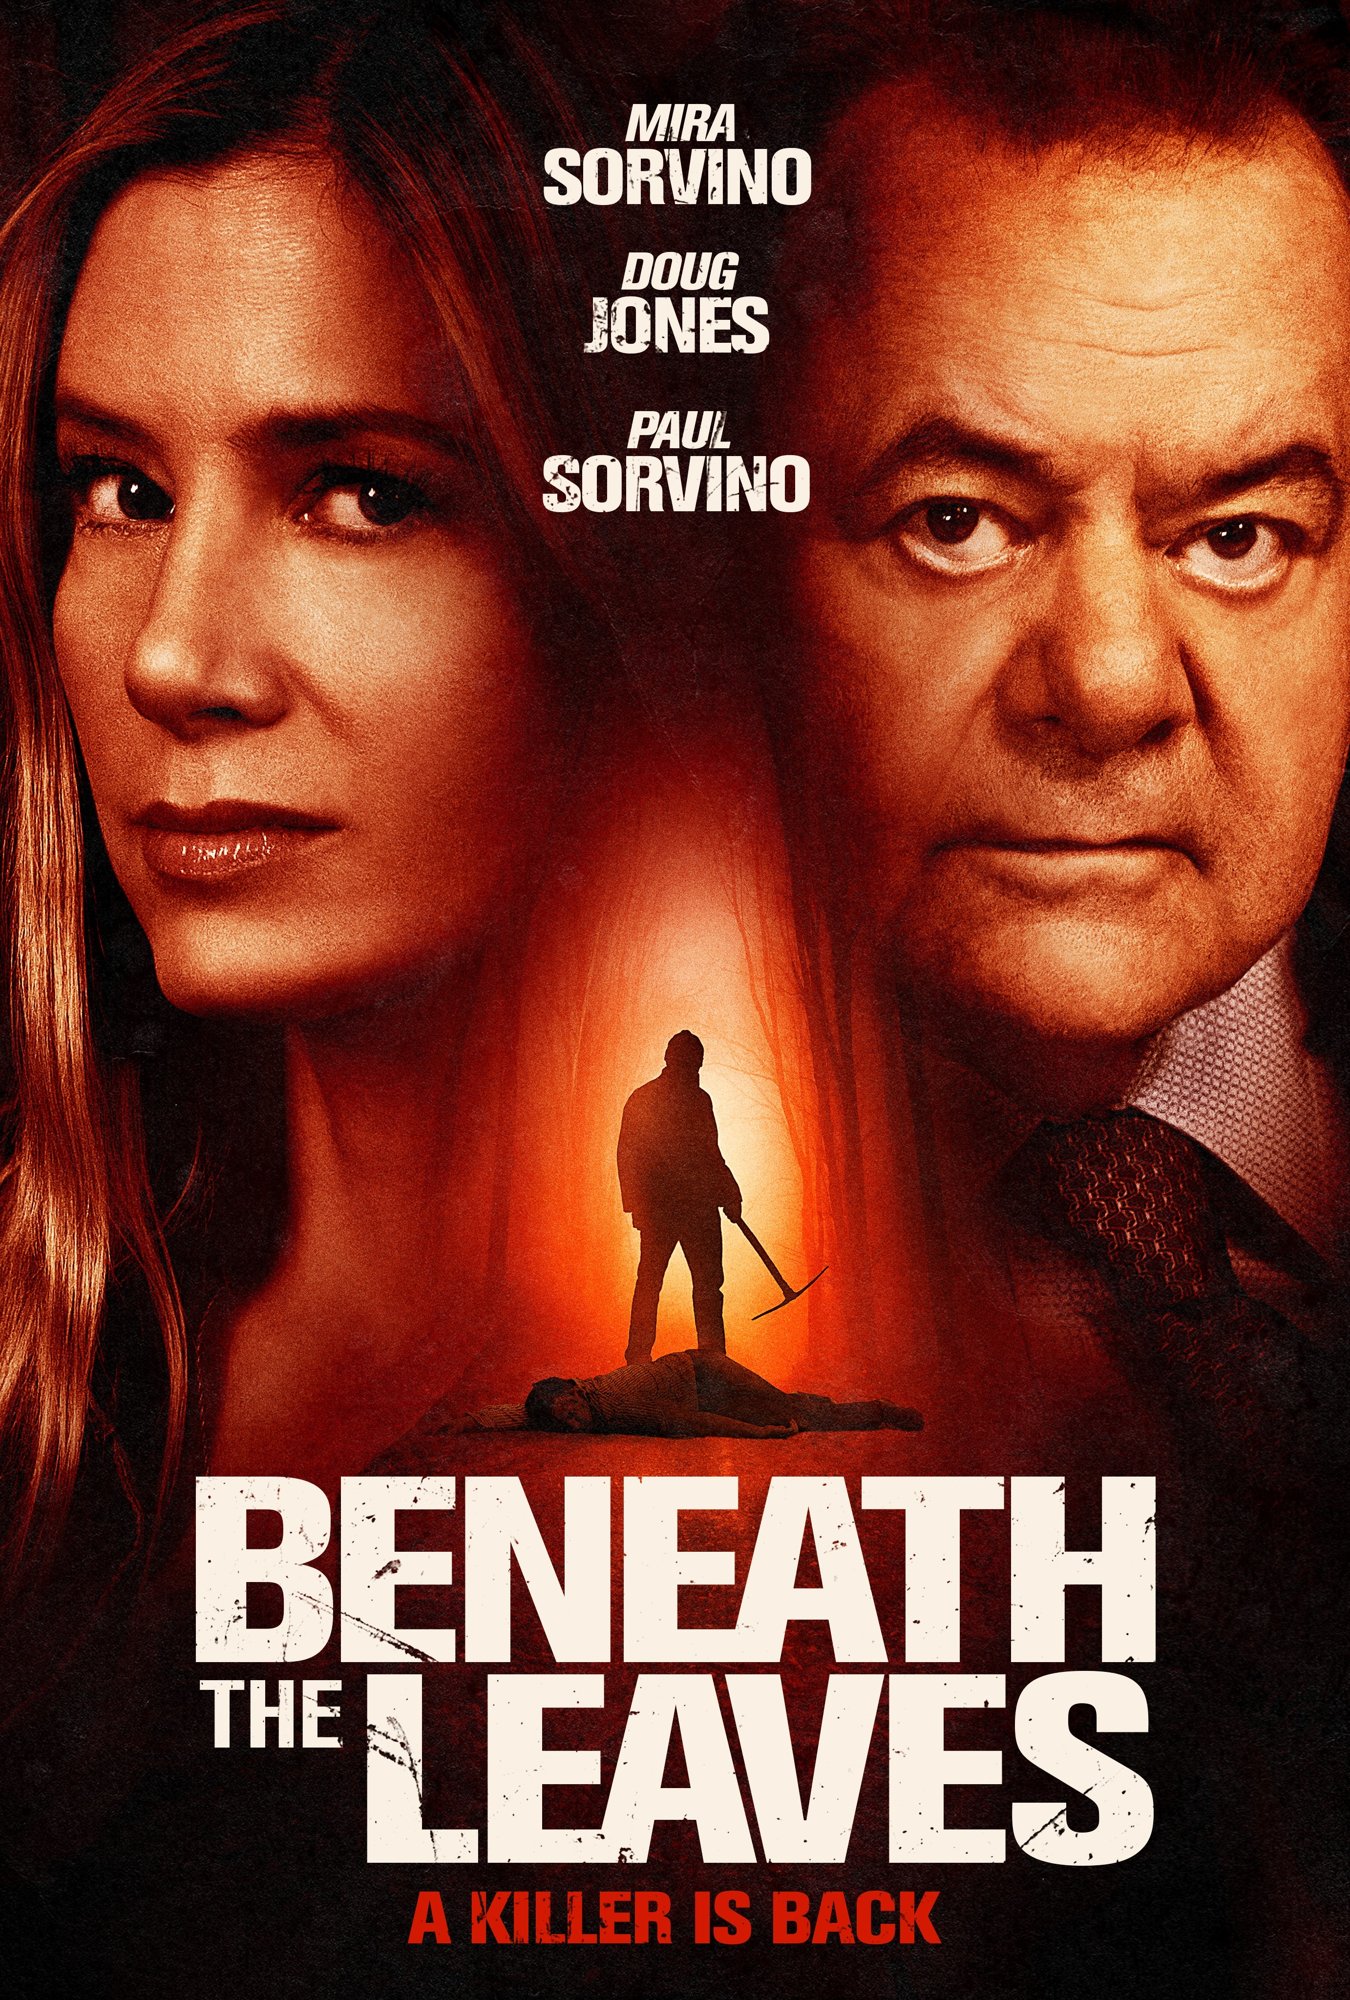 Poster of Eagle Films' Beneath the Leaves (2019)